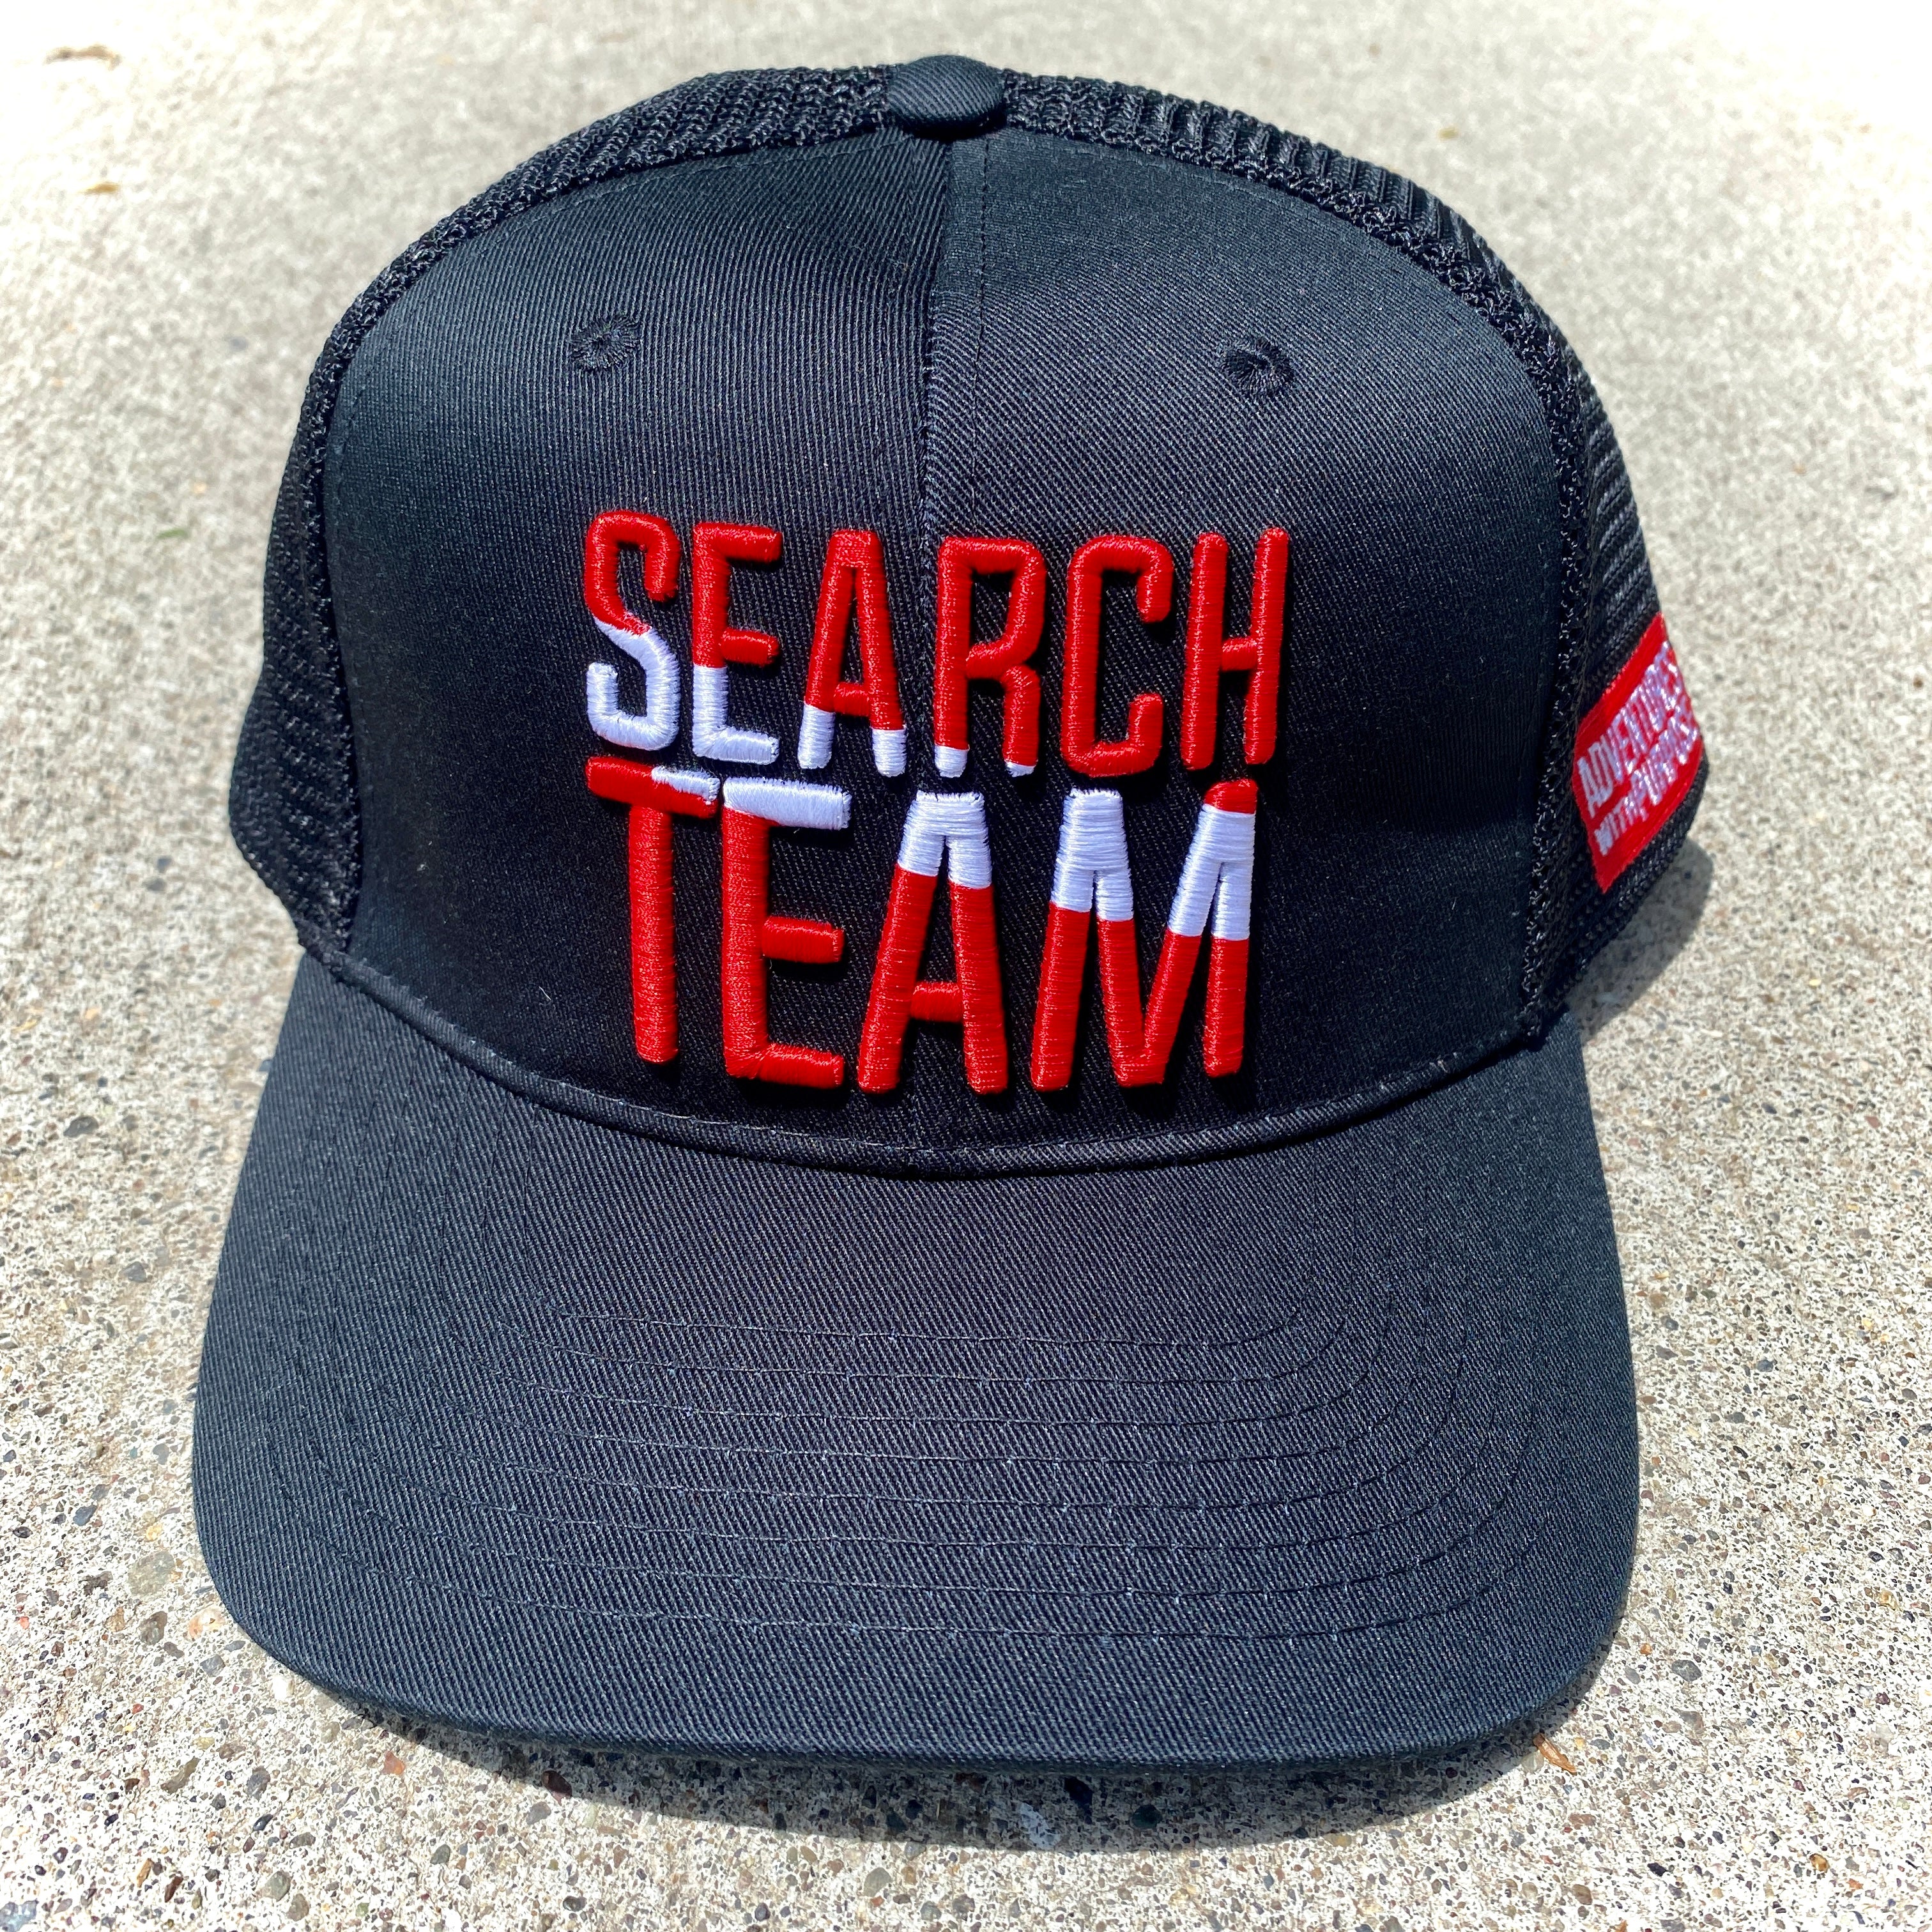 SEARCH TEAM HATS